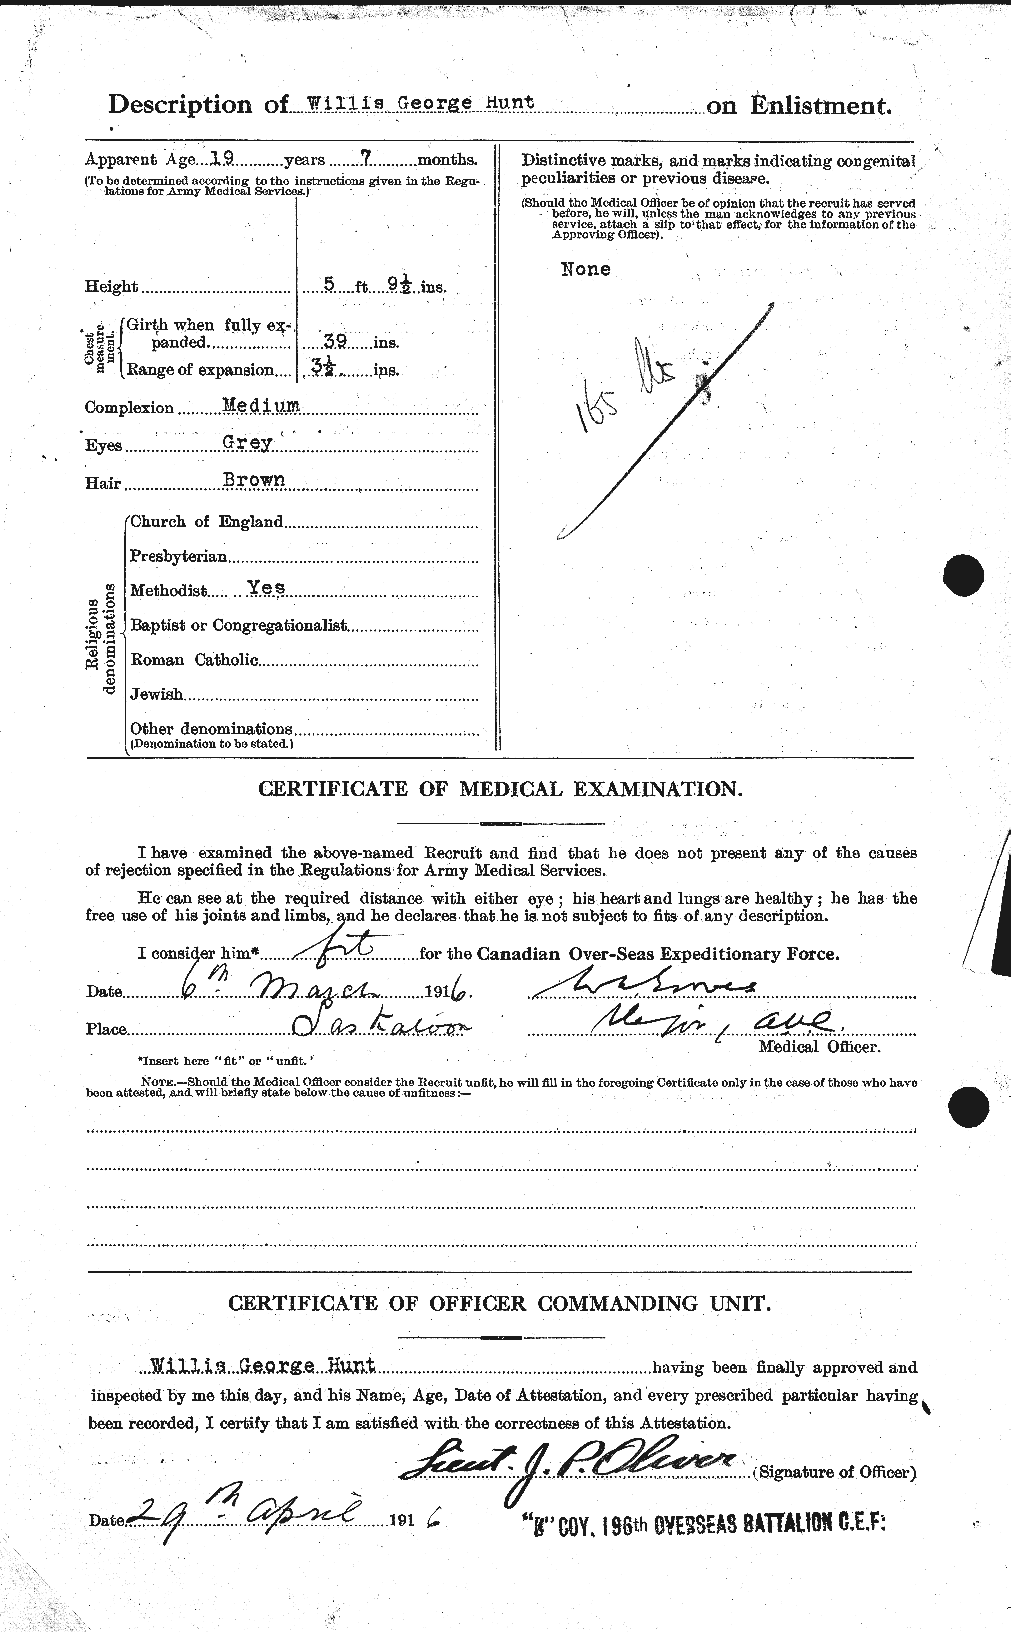 Personnel Records of the First World War - CEF 408937b